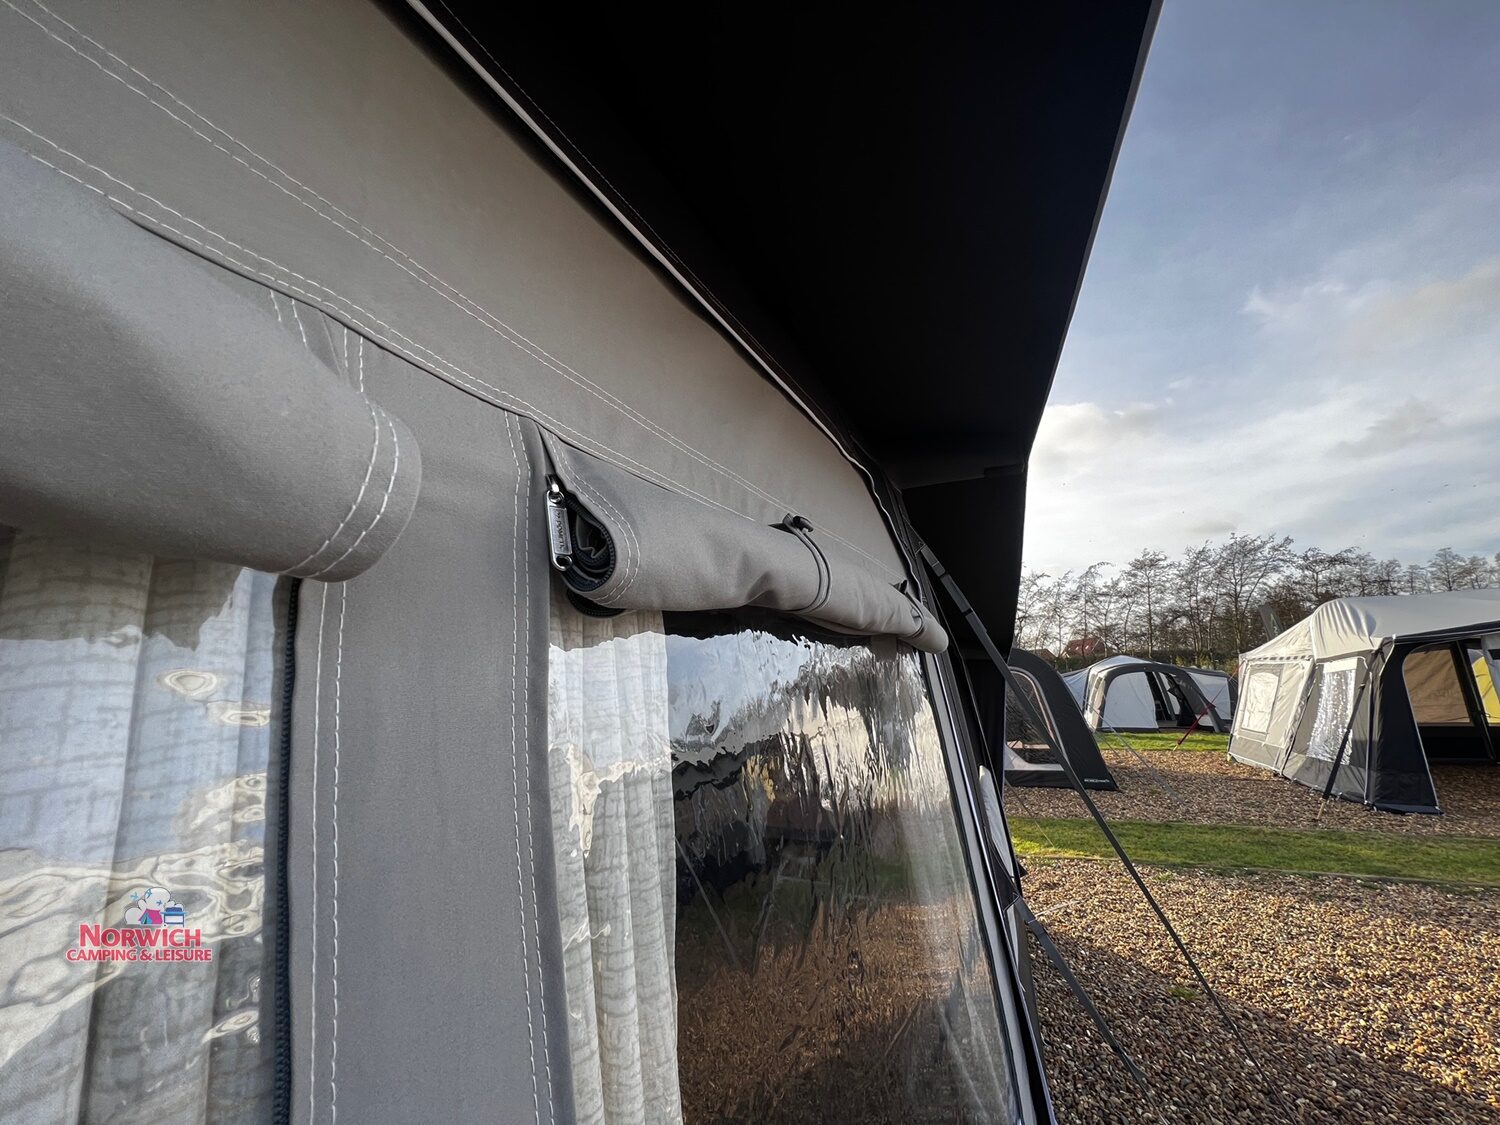 Dometic Residence All Season Awning On A Bailey Caravan At Norwich Camping 8